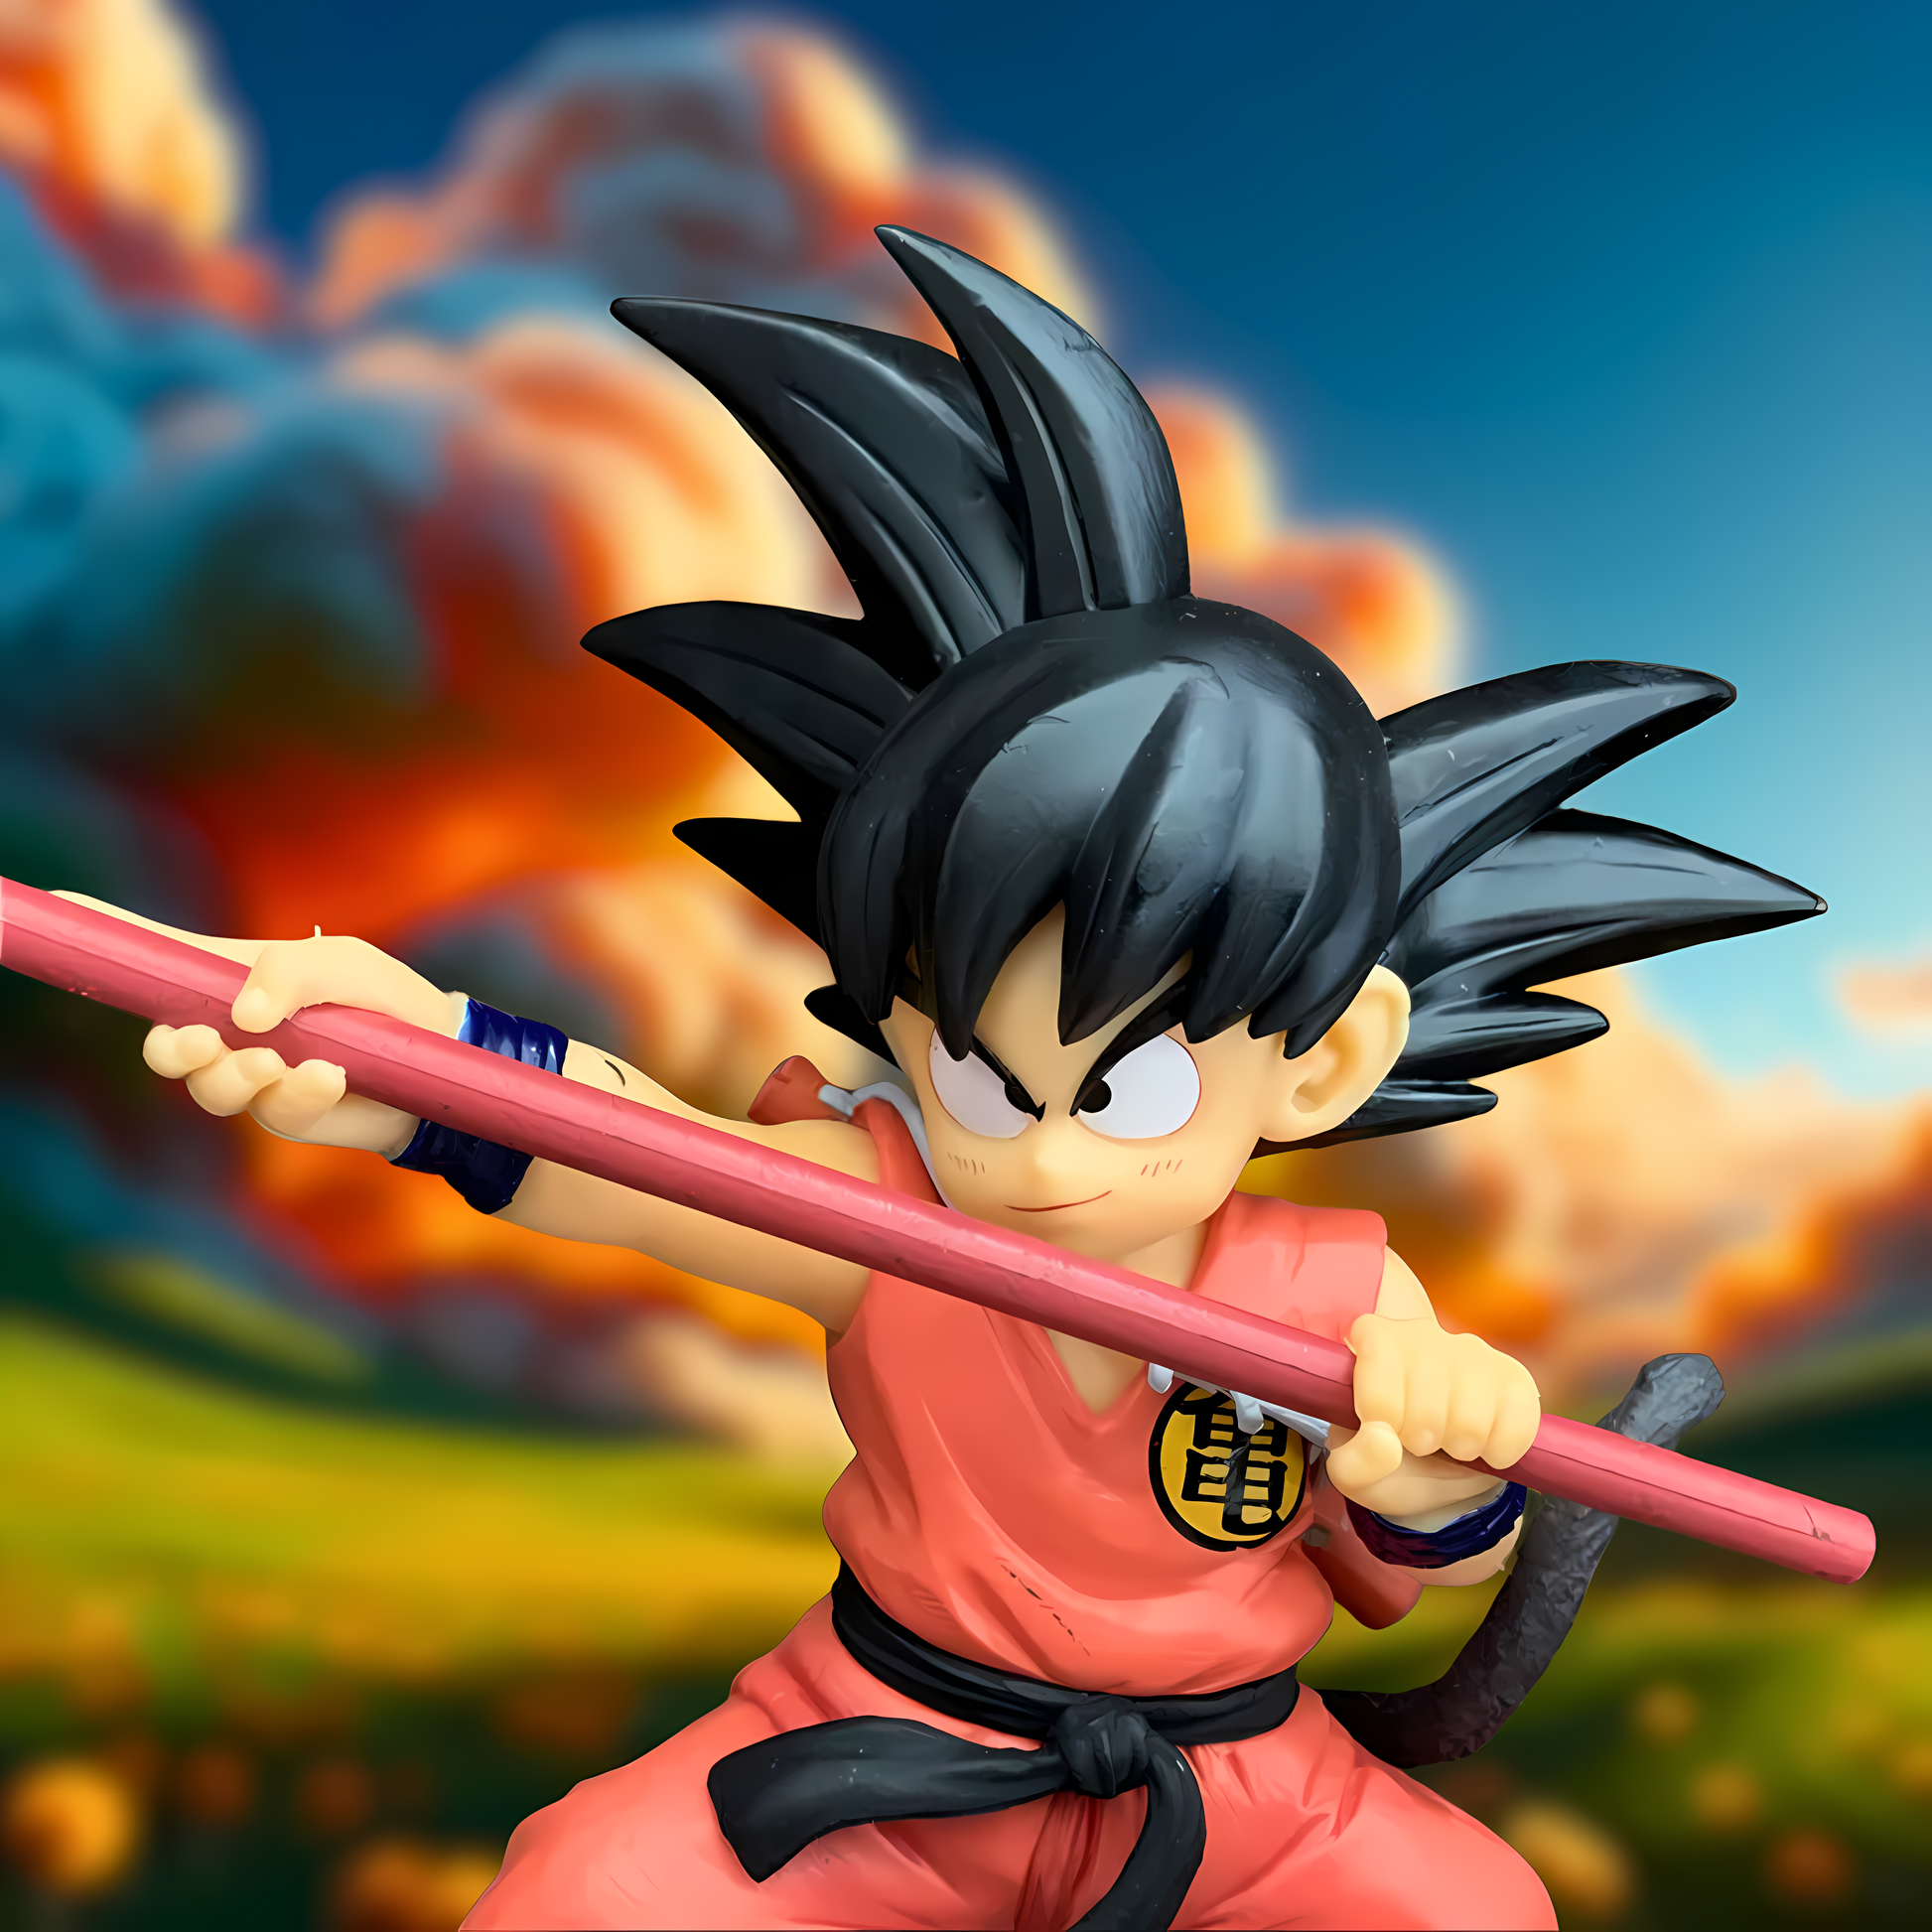 Intense Dragon Ball figure of 'The Adventures Begin' Goku, gripping his Power Pole ready for action, set before an explosive orange backdrop, a must-have for collectors.